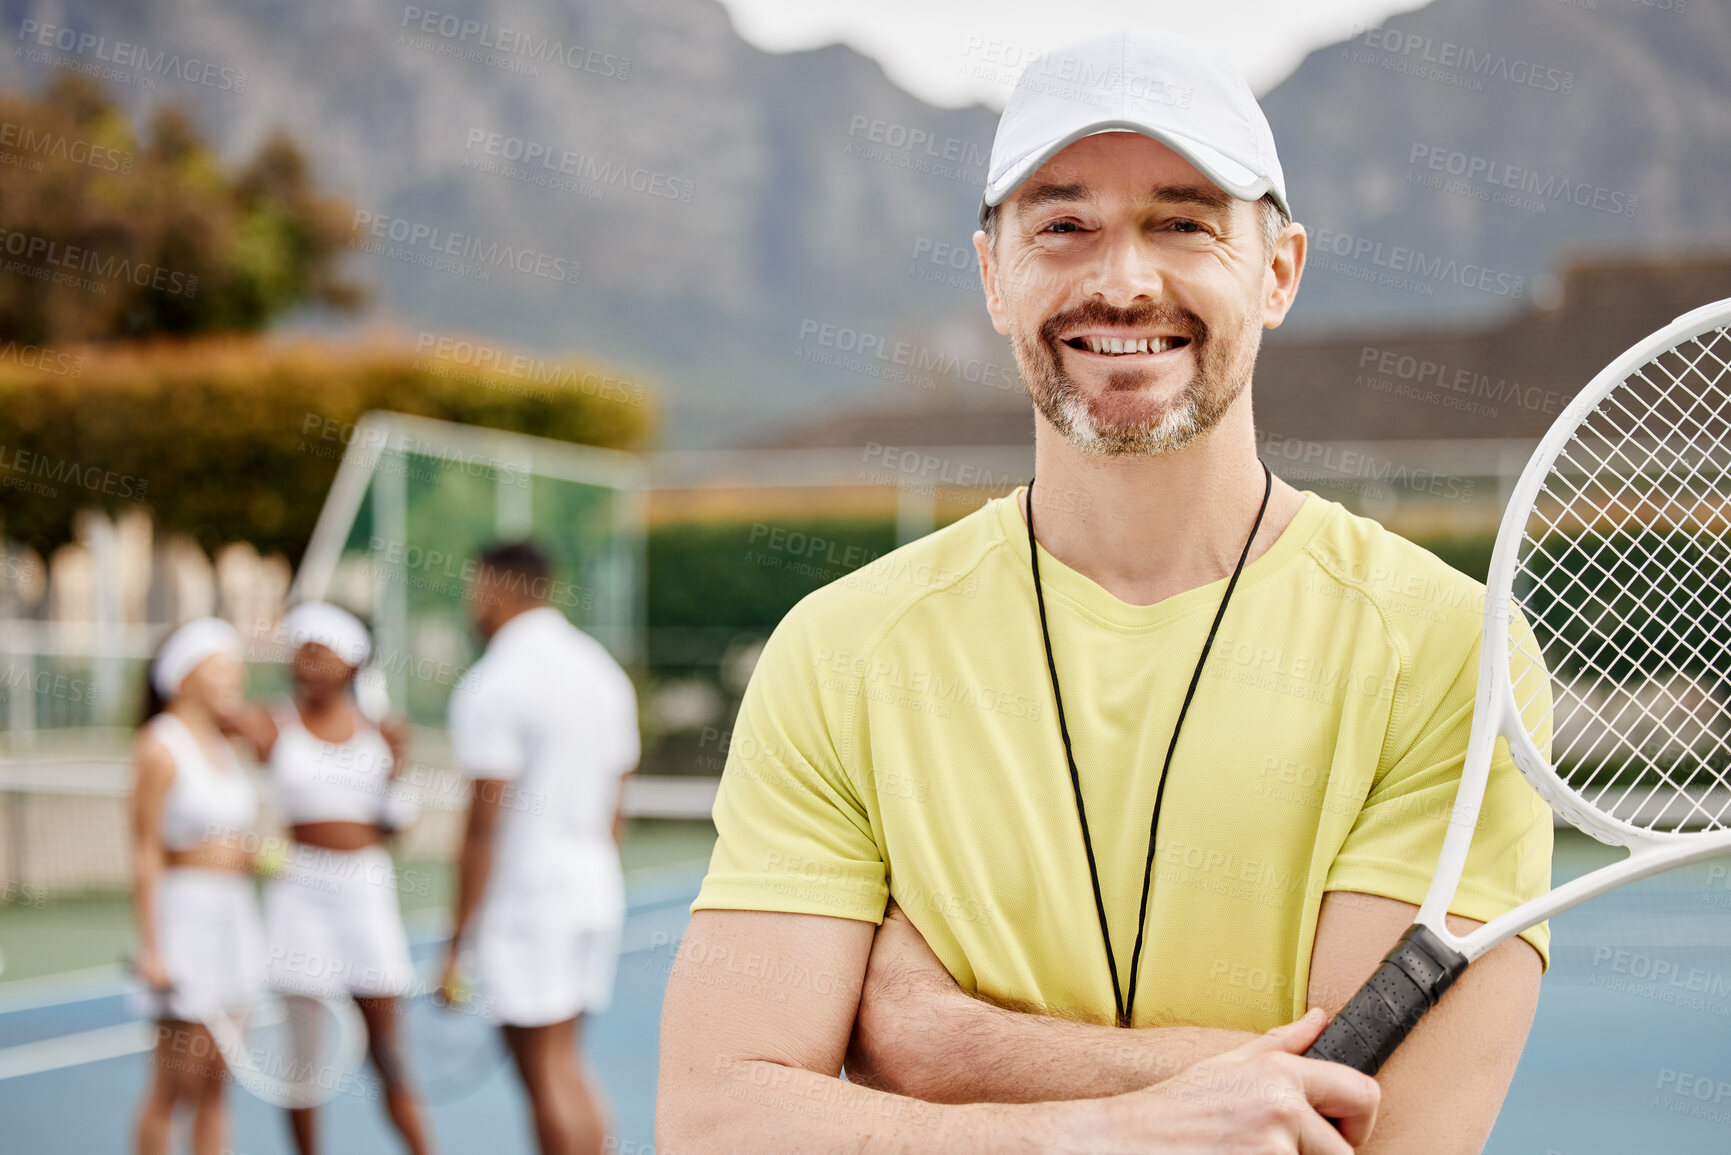 Buy stock photo Cropped portrait of a handsome mature male tennis coach standing outside with his arms folded and his students in the background